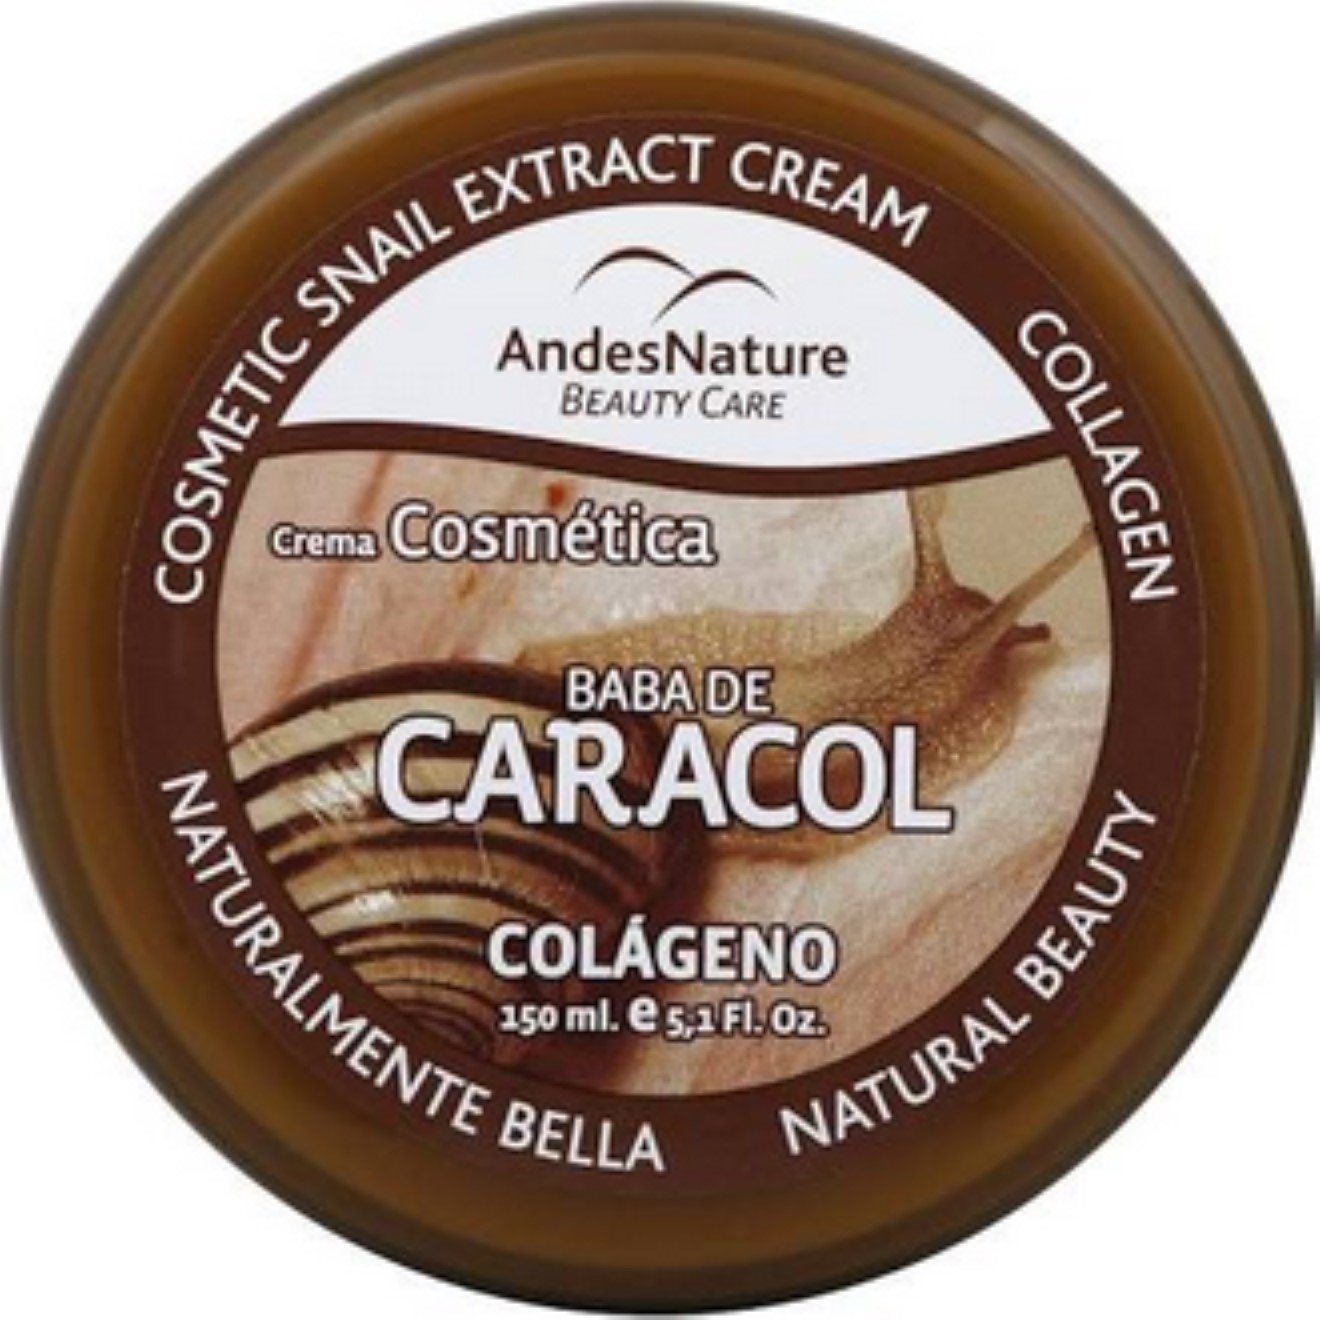 4th Ave Market: Andes Nature Cosmetic Snail Extract Cream, 5.12 Ounce